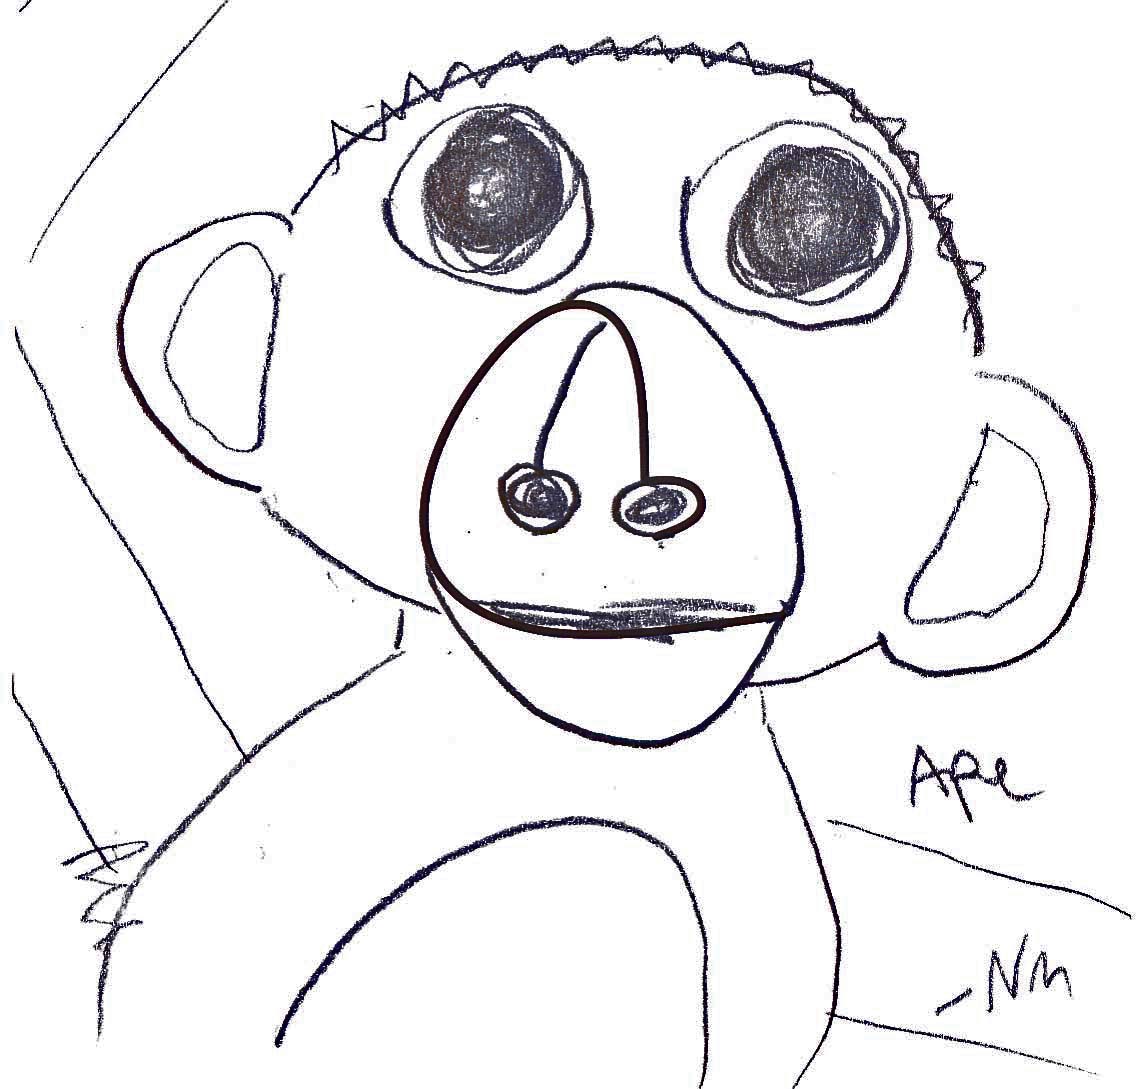 another ape